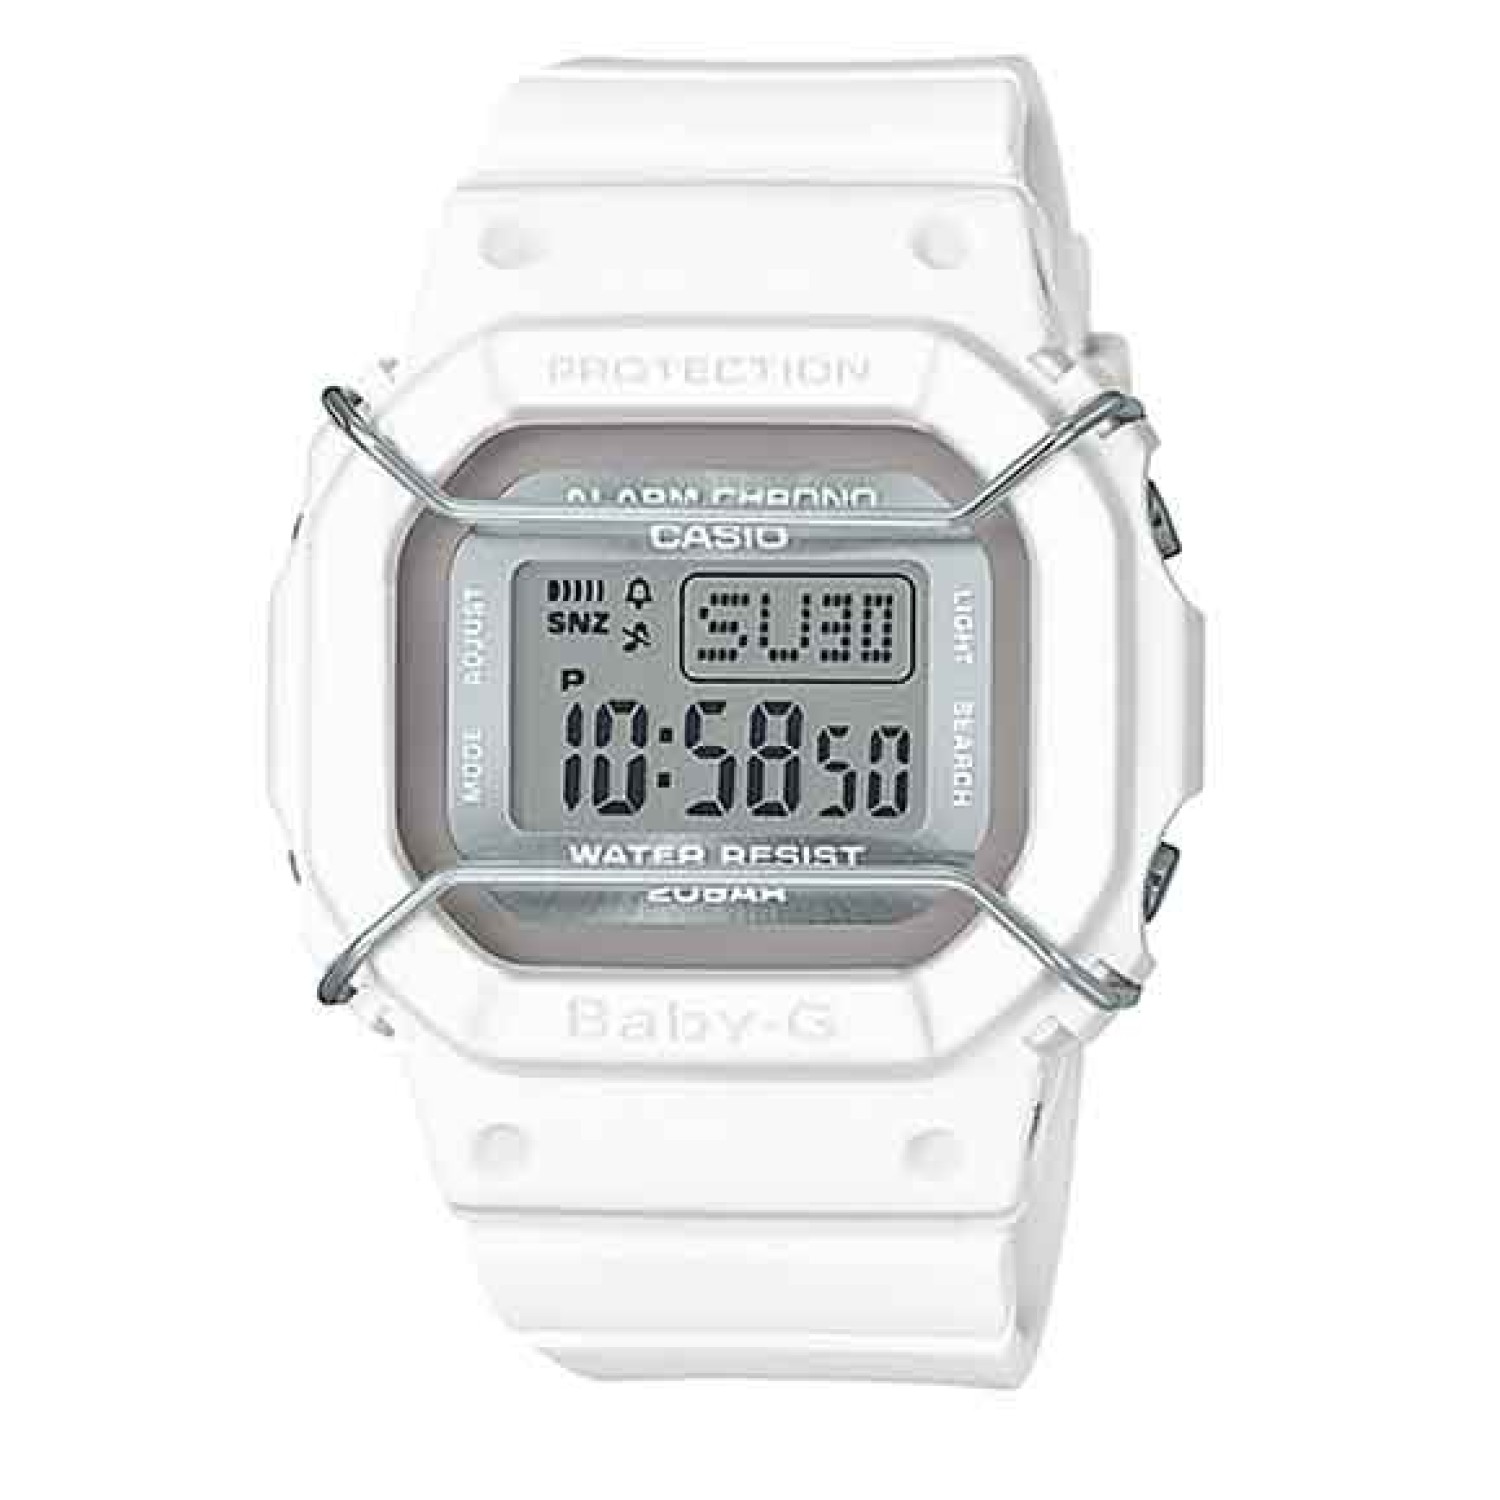 BGD501UM-7 BabY-G. Here are some new urban clear colour variations on the traditional digital with face protector look that has defined the BABY-G from the very beginning. The matte finish of the coloring combines with the metal protector @christies.onlin